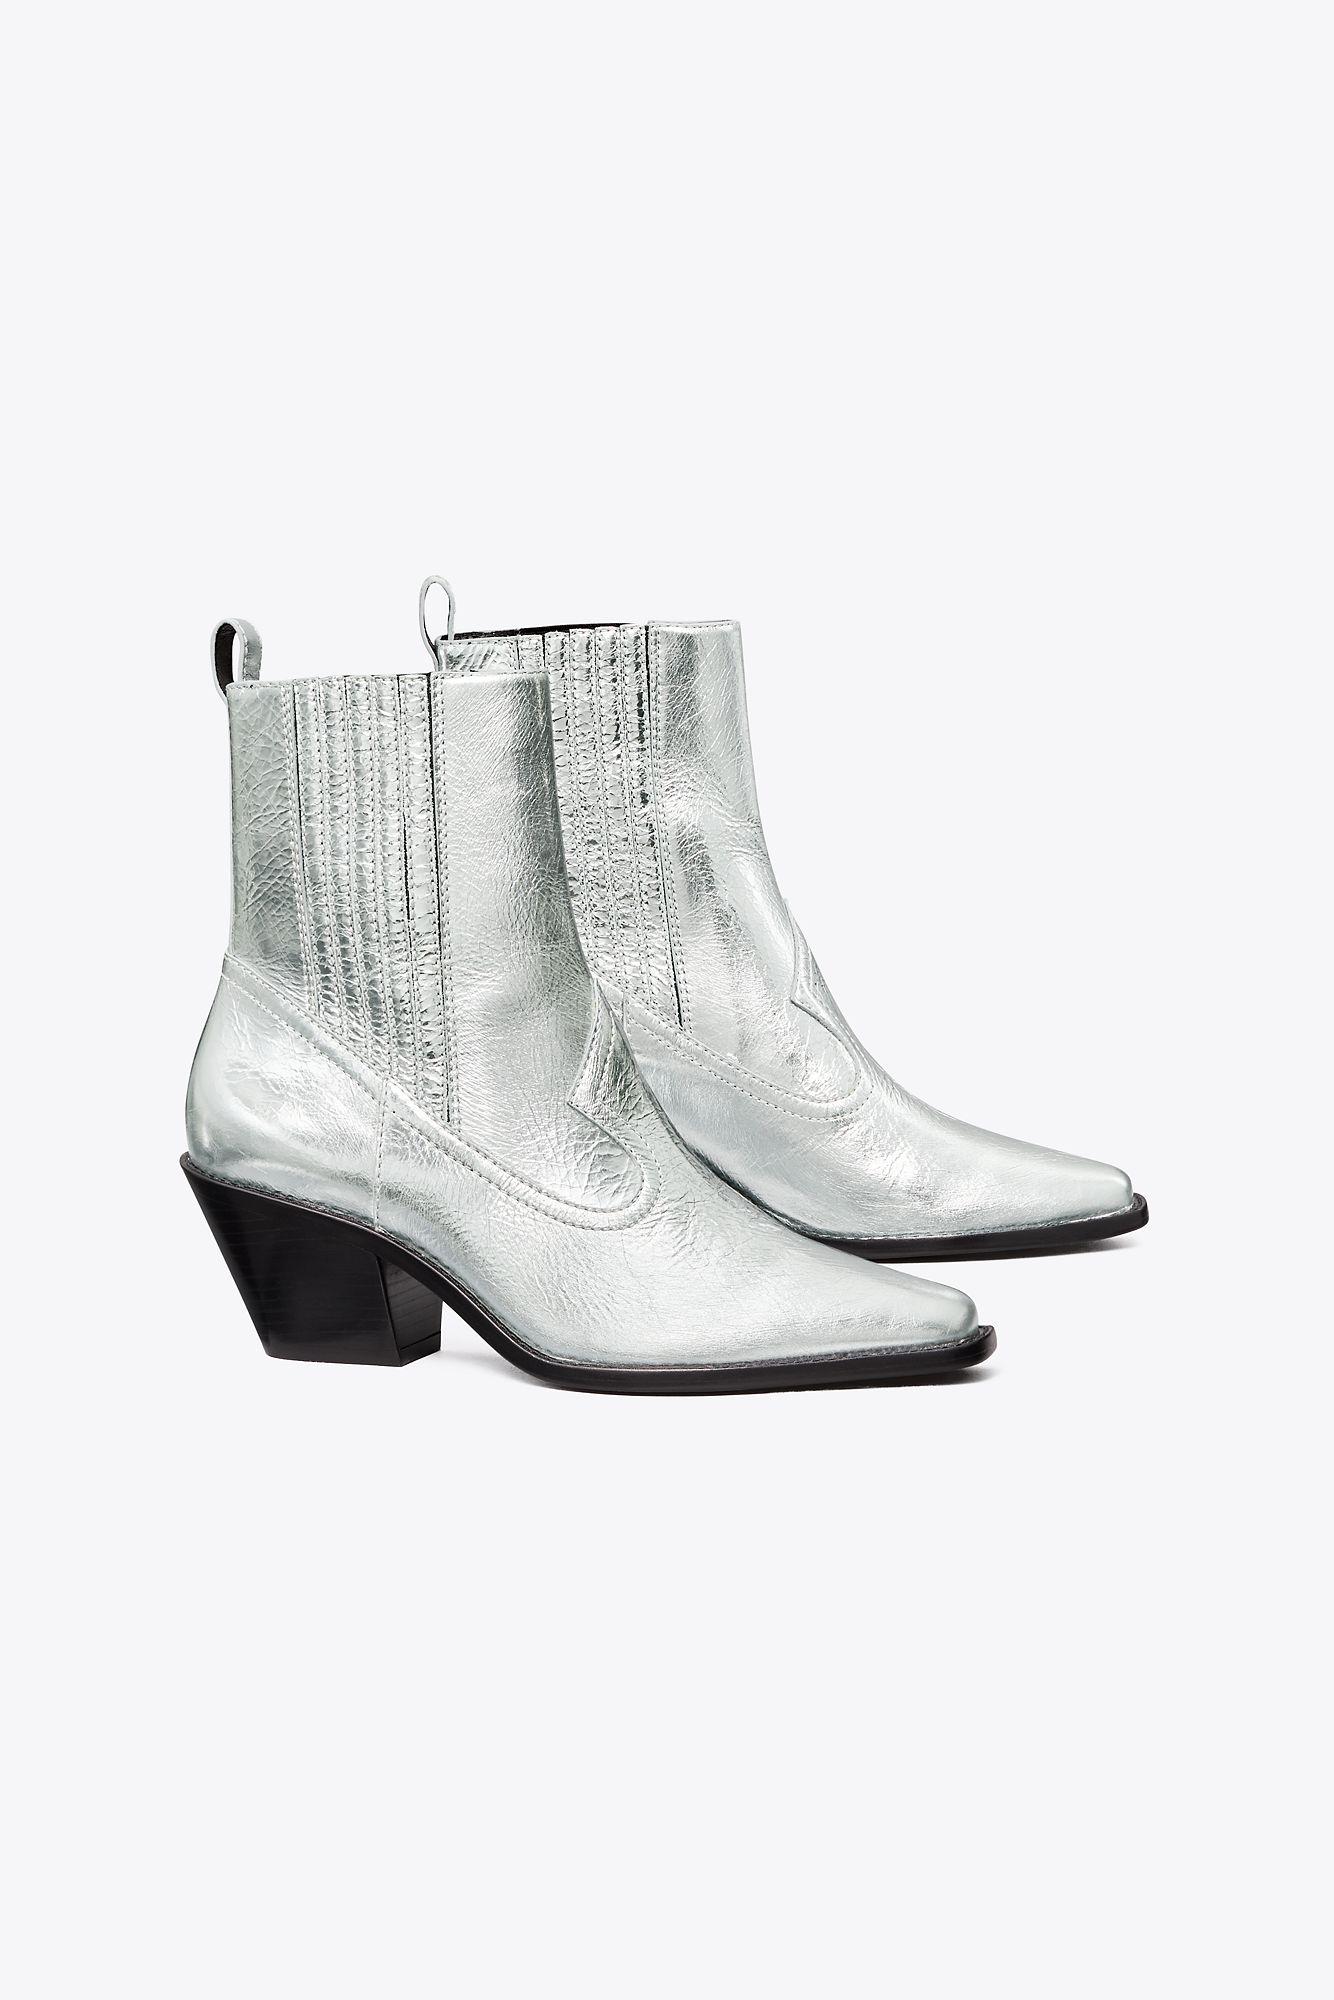 Tory Burch Western Ankle Boot in White | Lyst